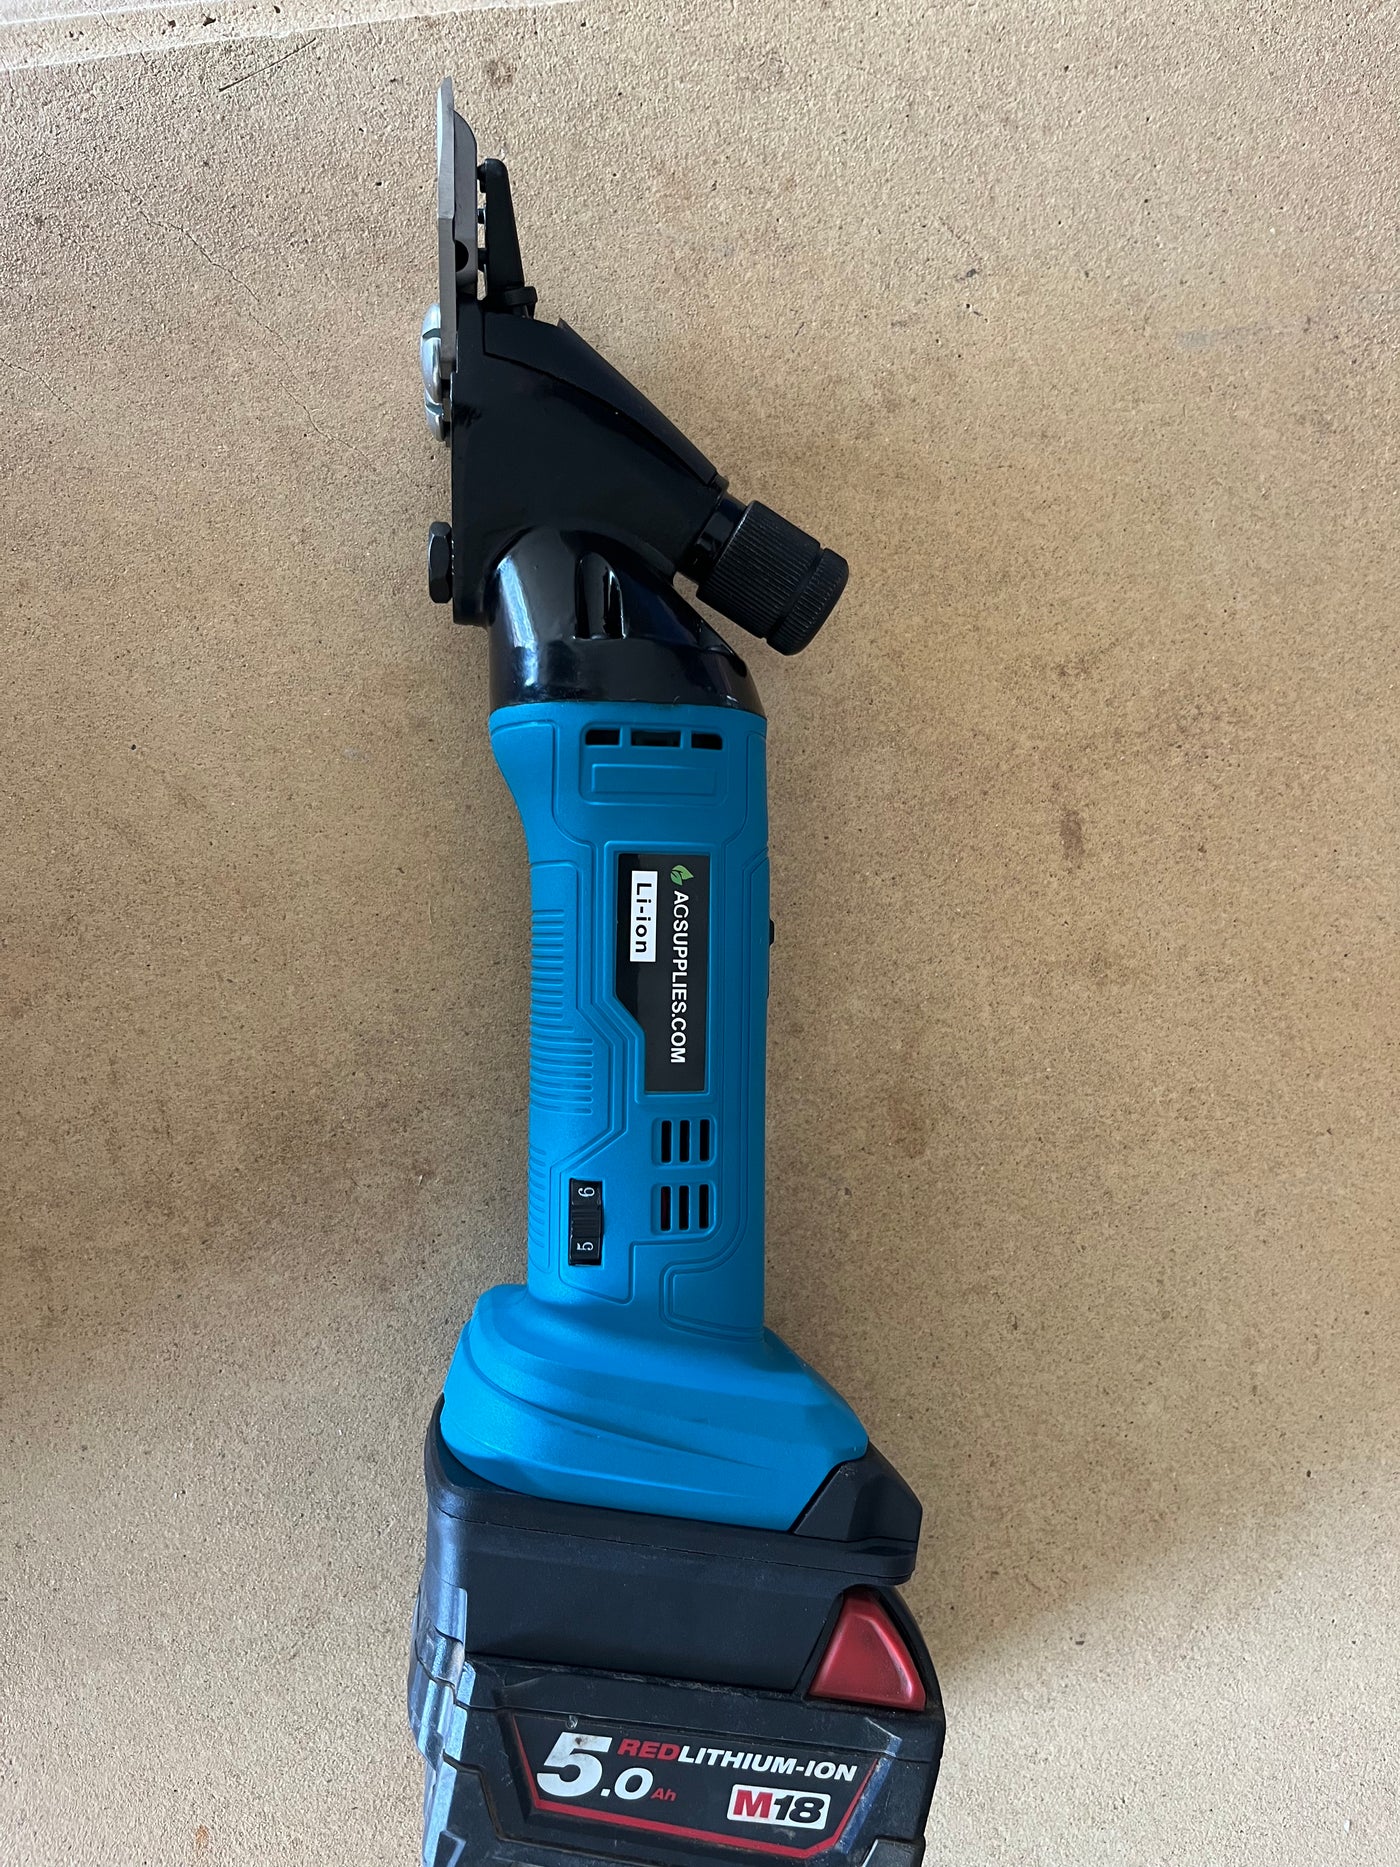 DM18M Battery Converter Adapter: Engineered for Makita tools, it transforms Milwaukee M18 18V to Makita 18V BL1830 BL1850 Batteries, while also accommodating Dewalt 20V Battery compatibility